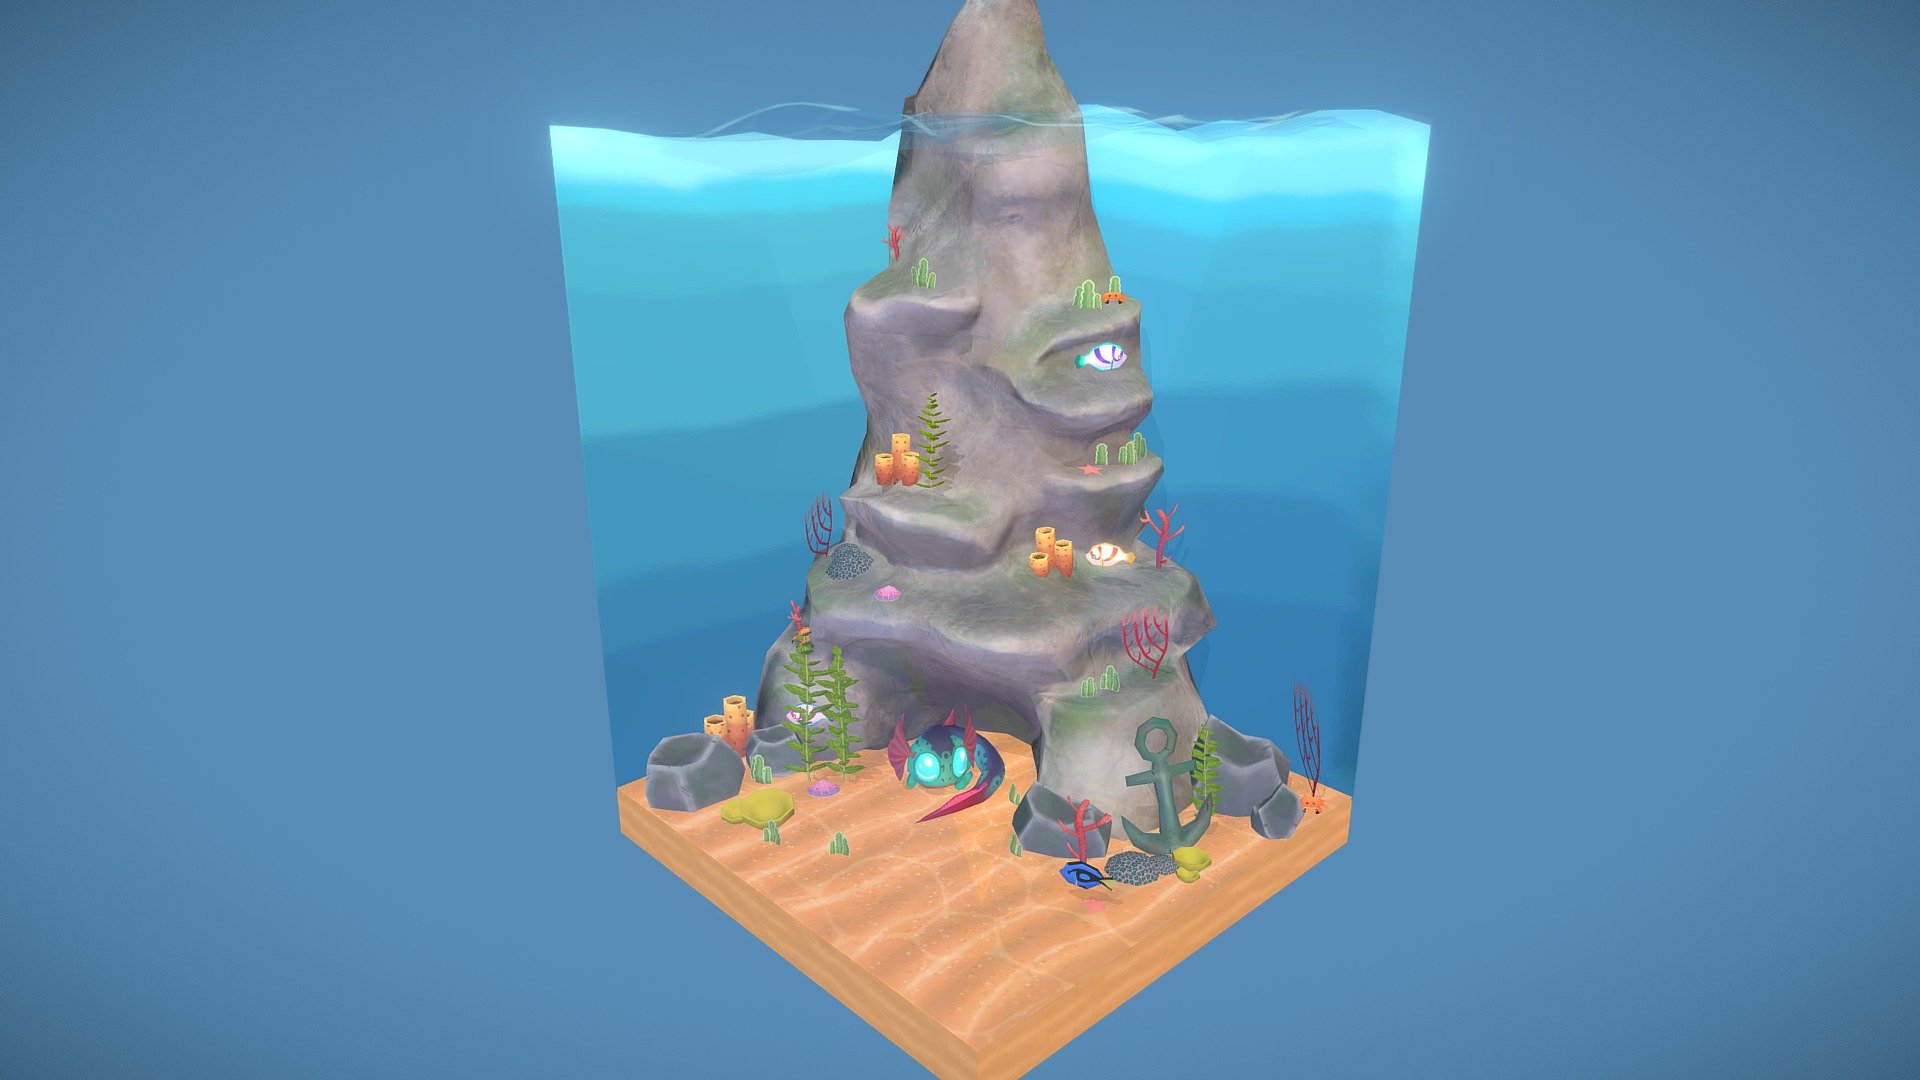 Scene made for a pet care AR videogame as part of a school project.

Creature based in: https://sketchfab.com/models/73a05ad164af4fe4ae502759b0974a70 - Underwater Scene - 3D model by Meri L. (@azurehusky) 3d model